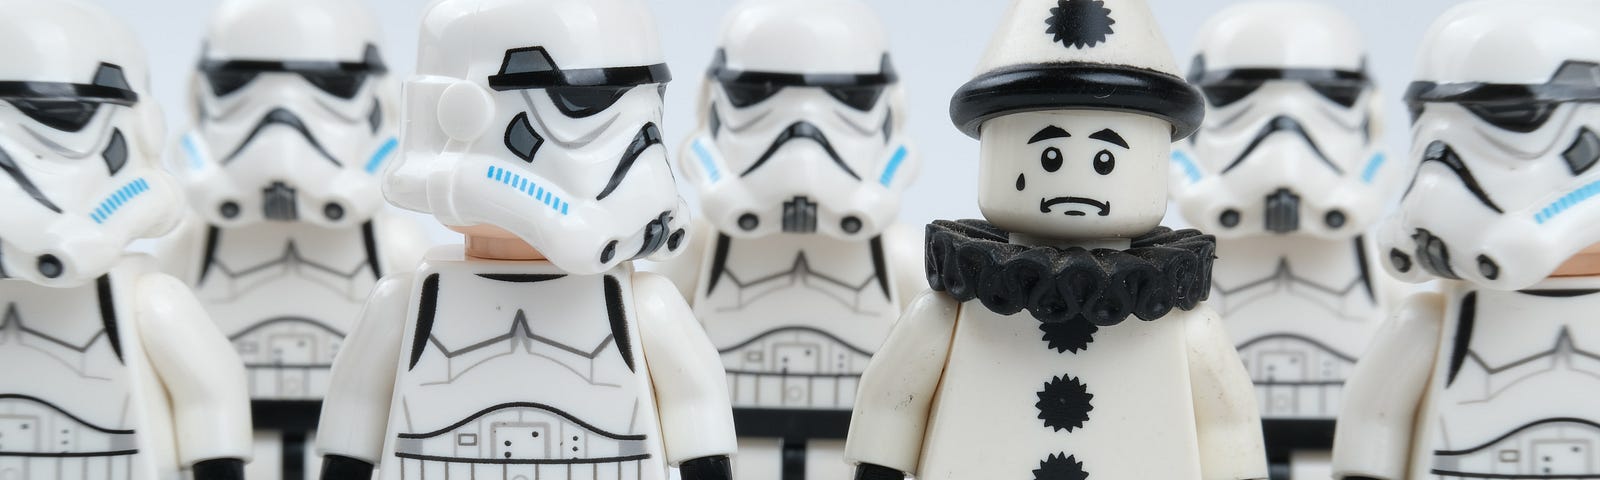 Lego Storm Troopers with one who is clearly not the same